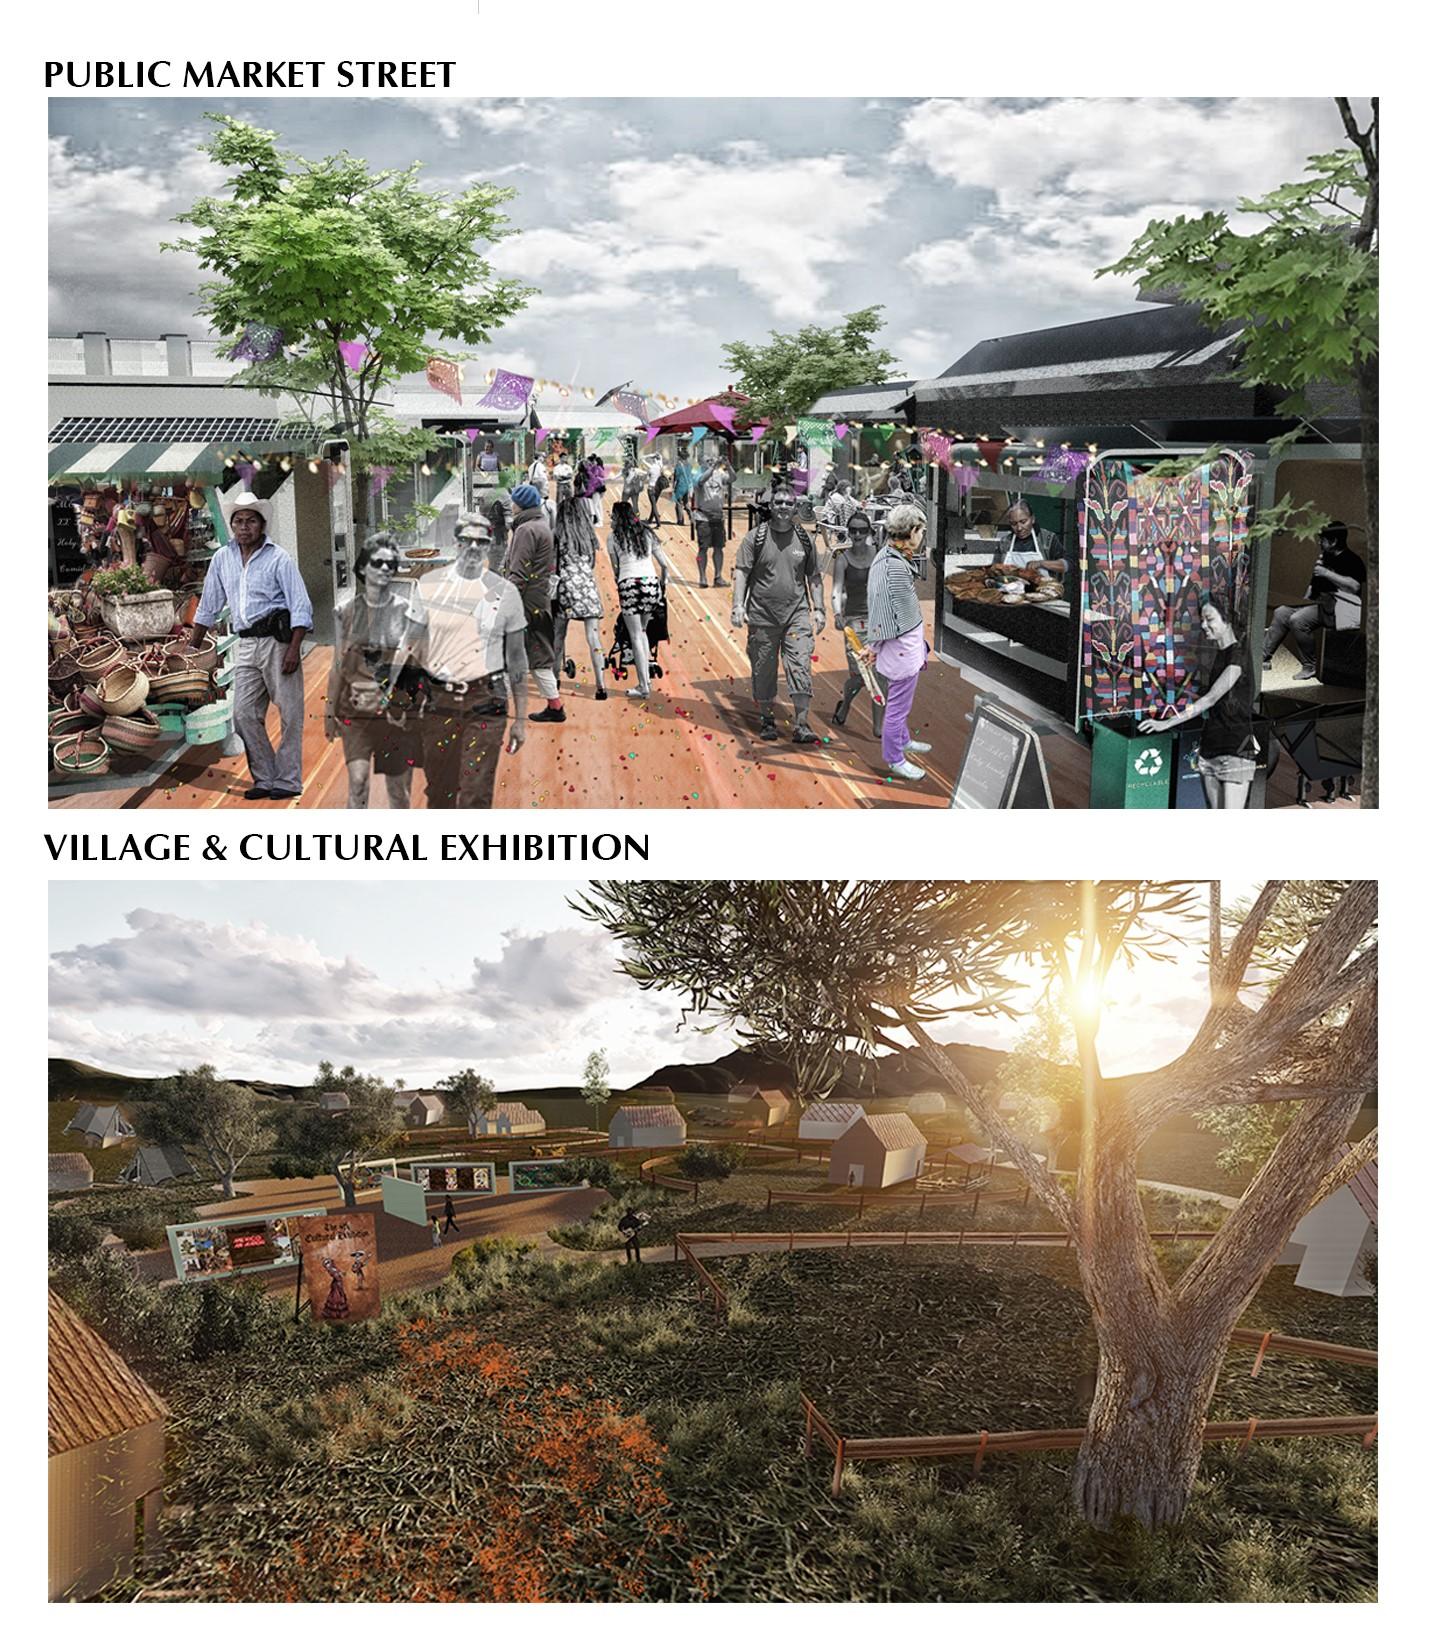 RENDERINGS FOR TEST SITE Showcasing how the public market streets can be used with some flexible infrastructure to meet sales needs (or camping needs), while the cultural atmosphere of the village will be shown through different events held on a regular basis, which will also be an important channel to link them with the locals.